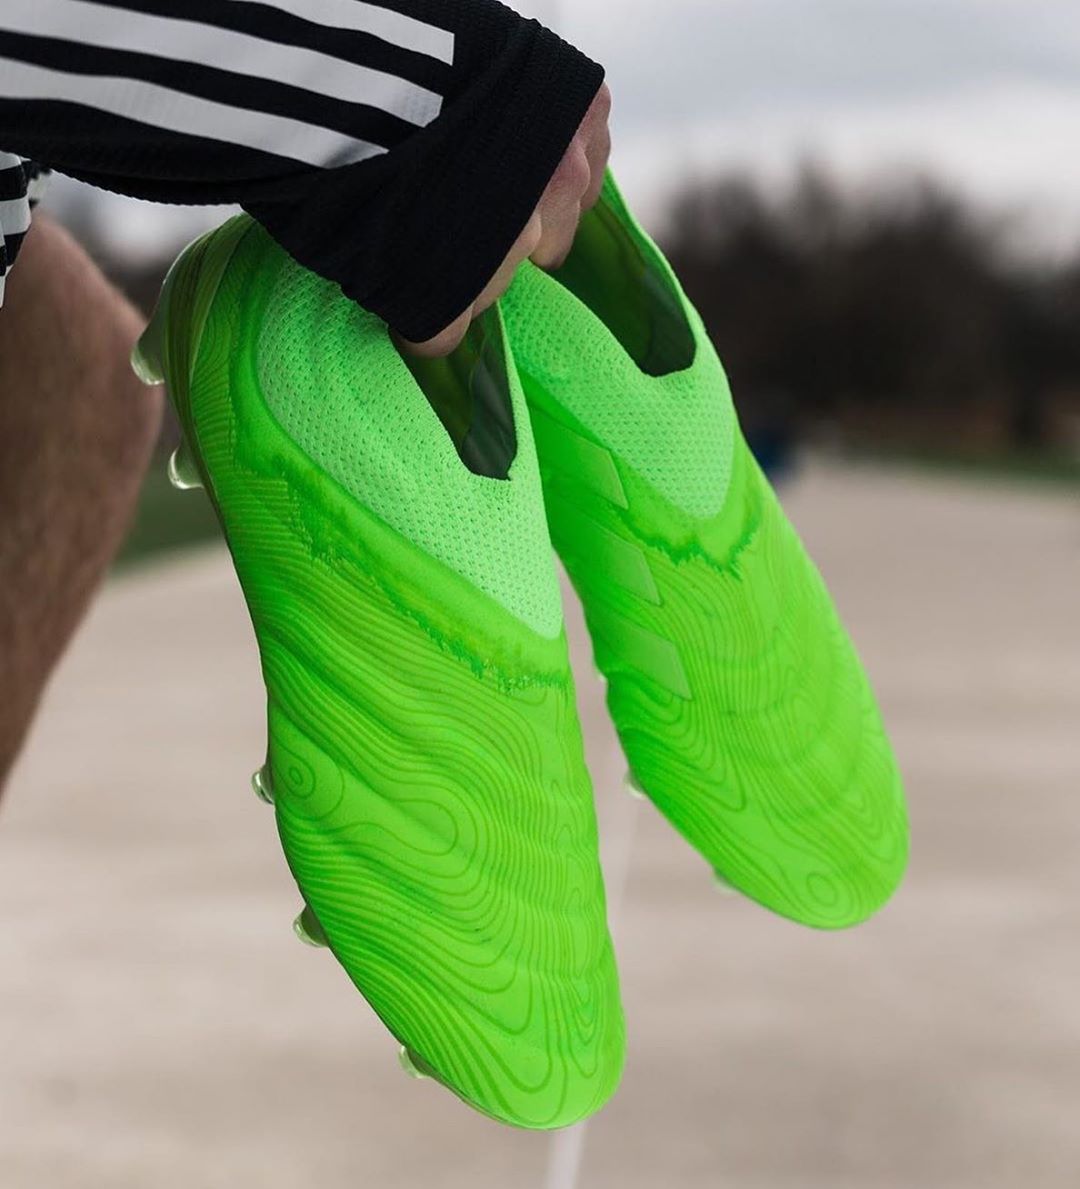 Adidas Copa 19+ Locality Pack